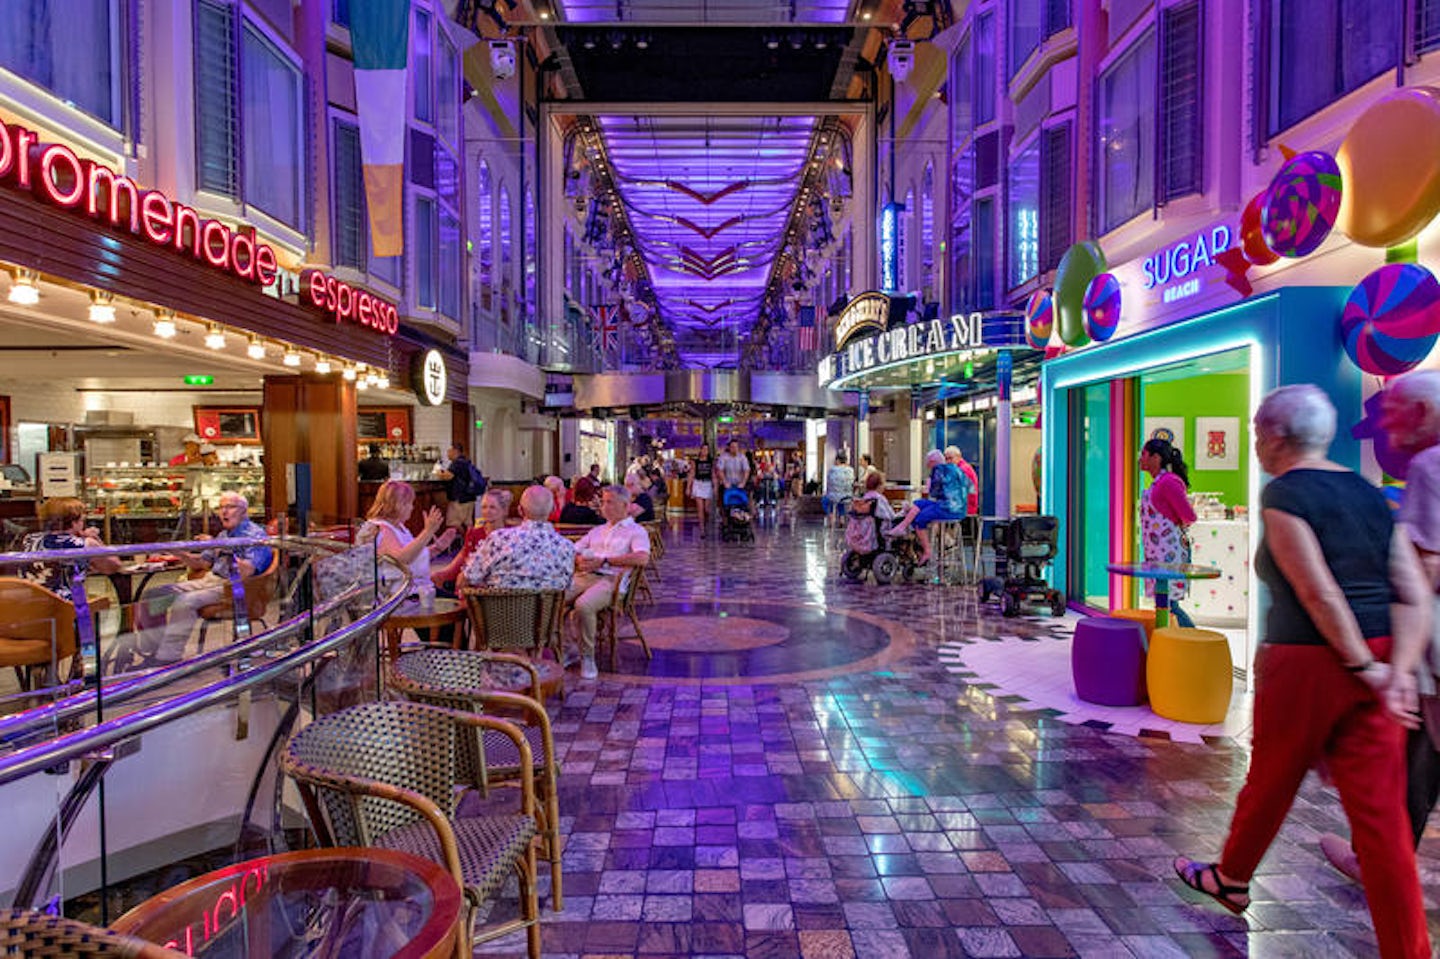 Royal Promenade on Independence of the Seas